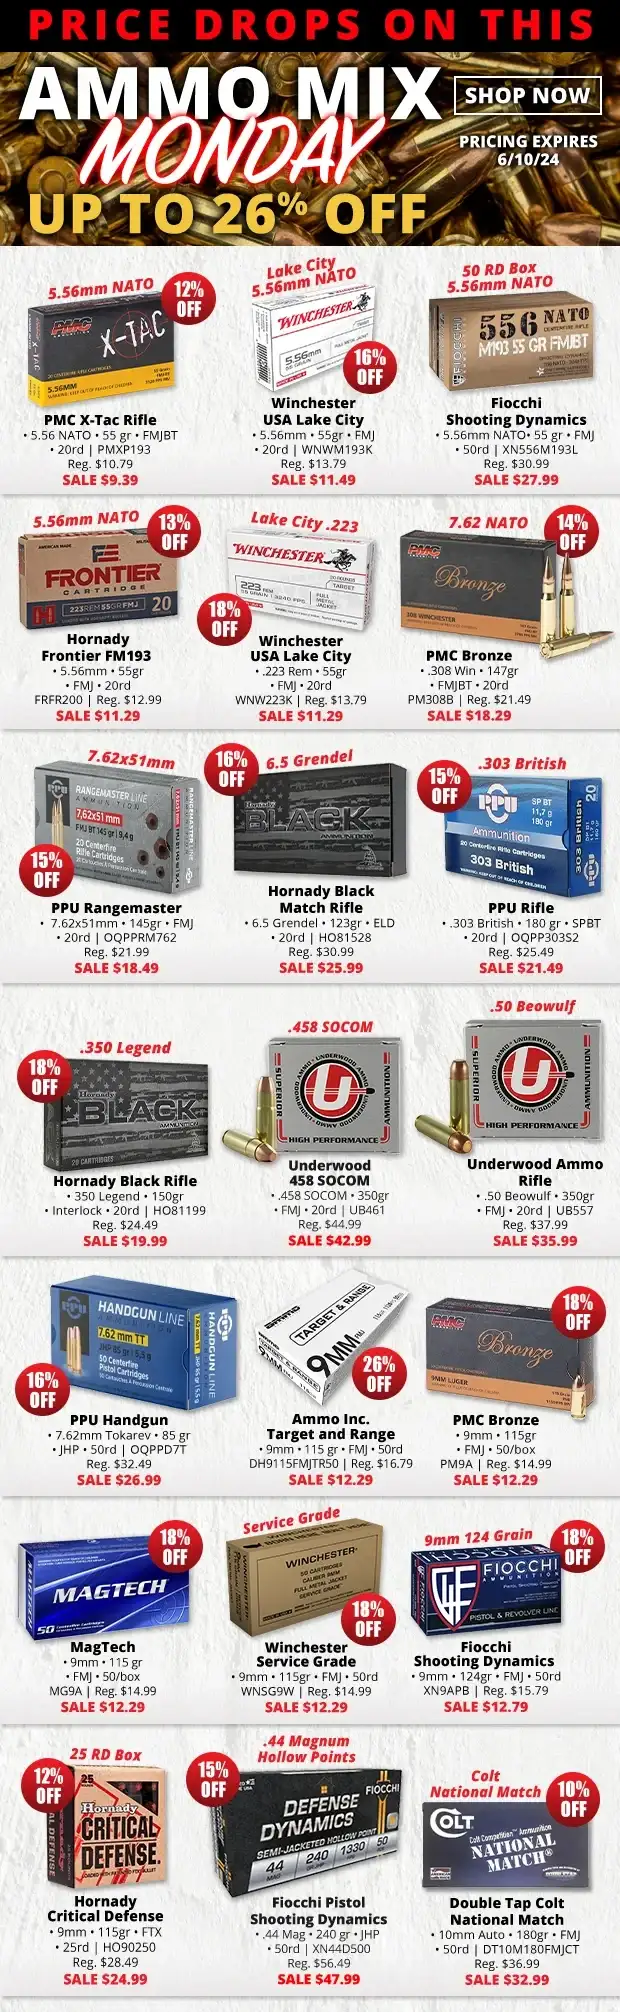 Price Drops With Up to 26% Off on Ammo Mix Monday